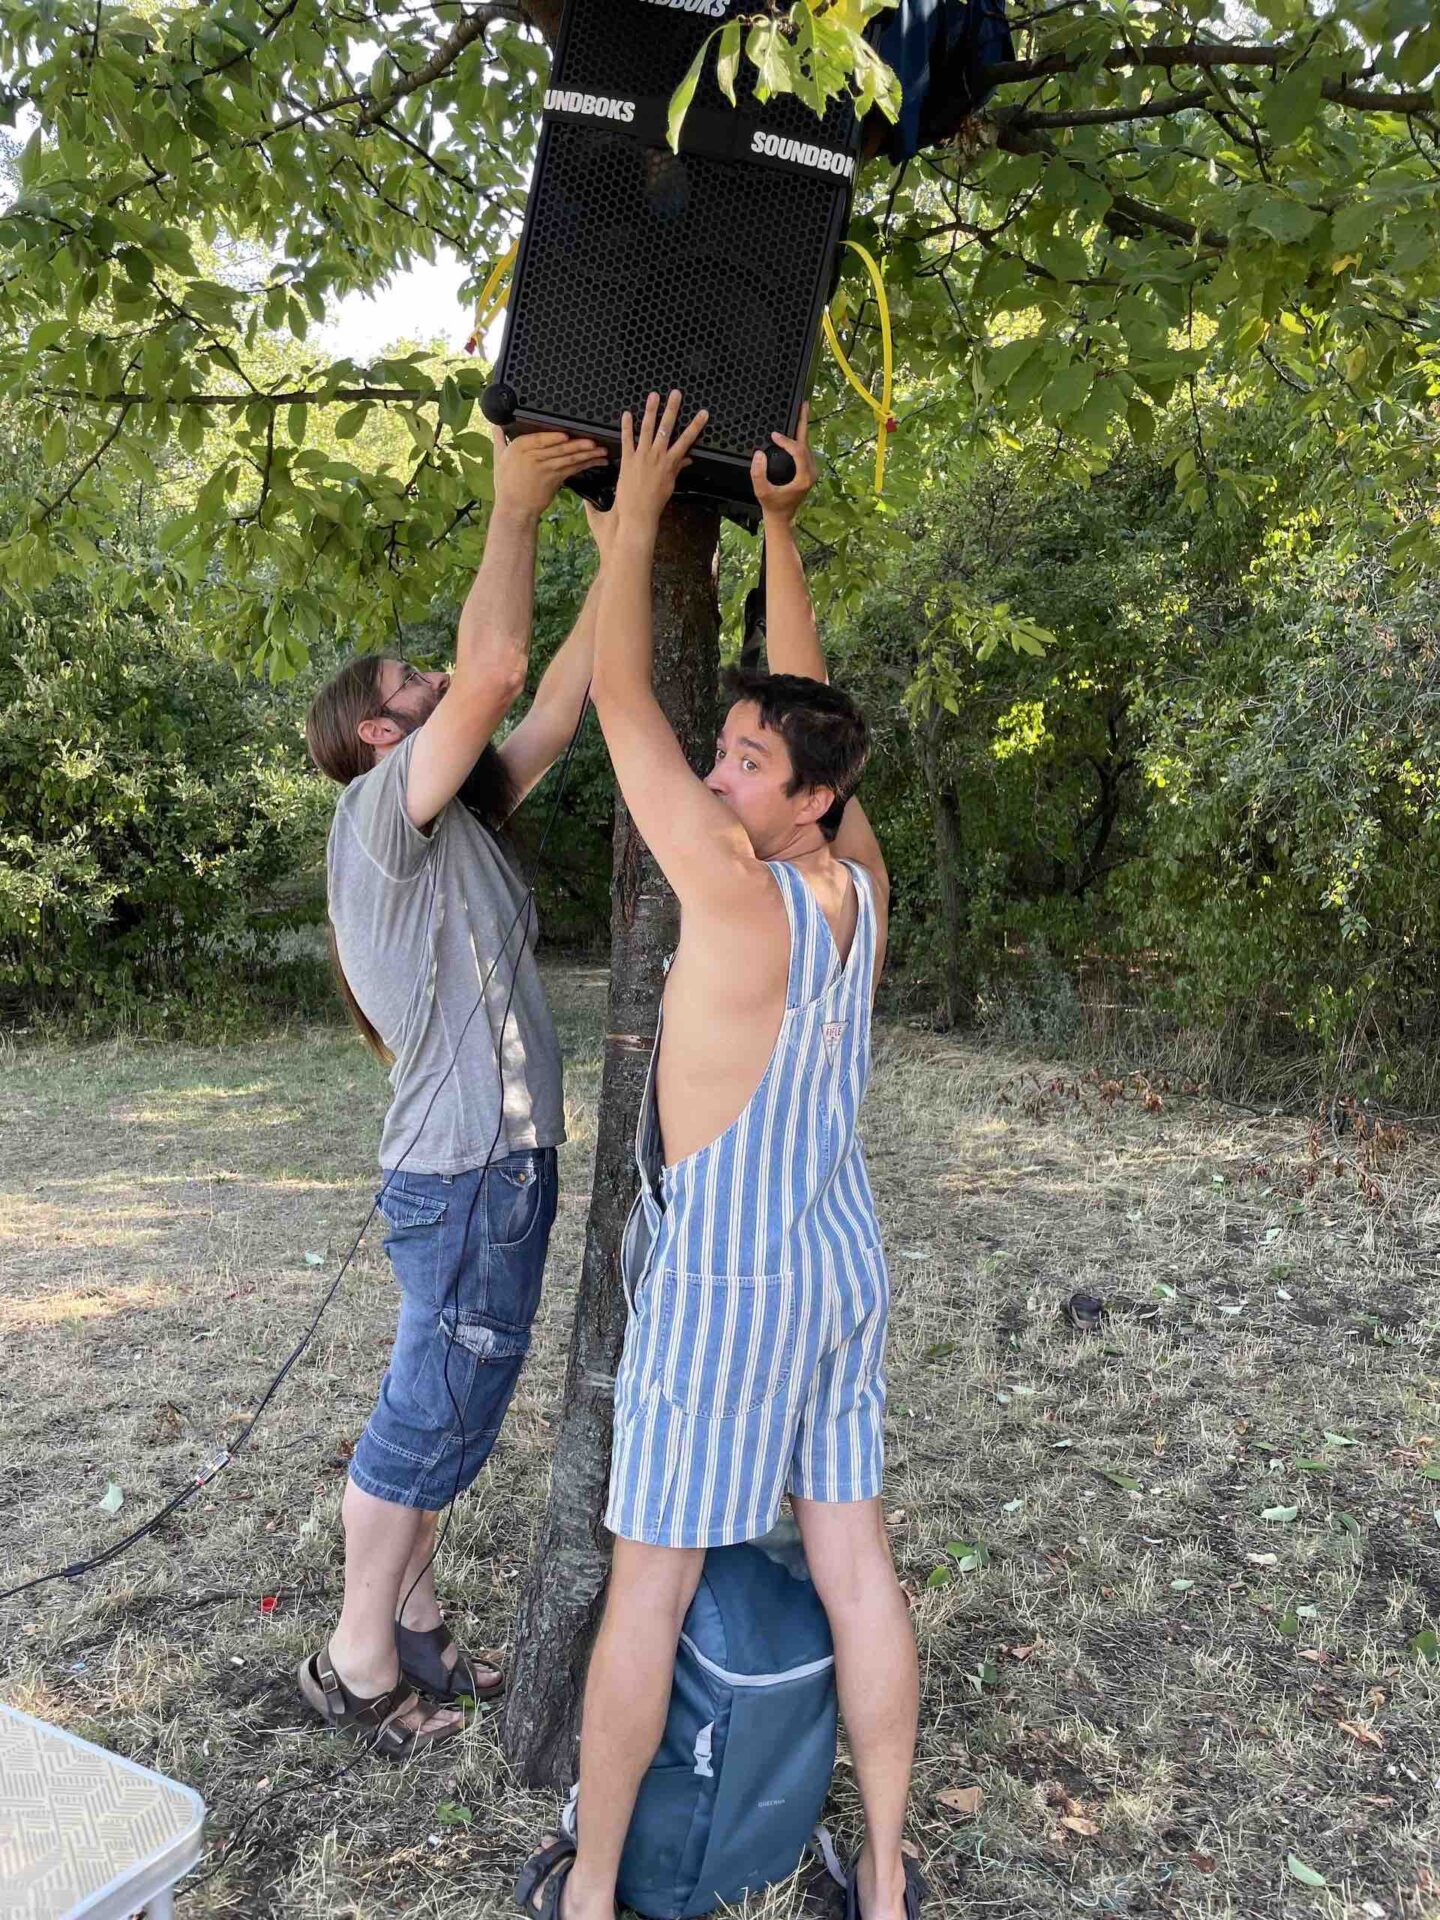 Two people preparing a rave hang a loudspeaker from a tree.